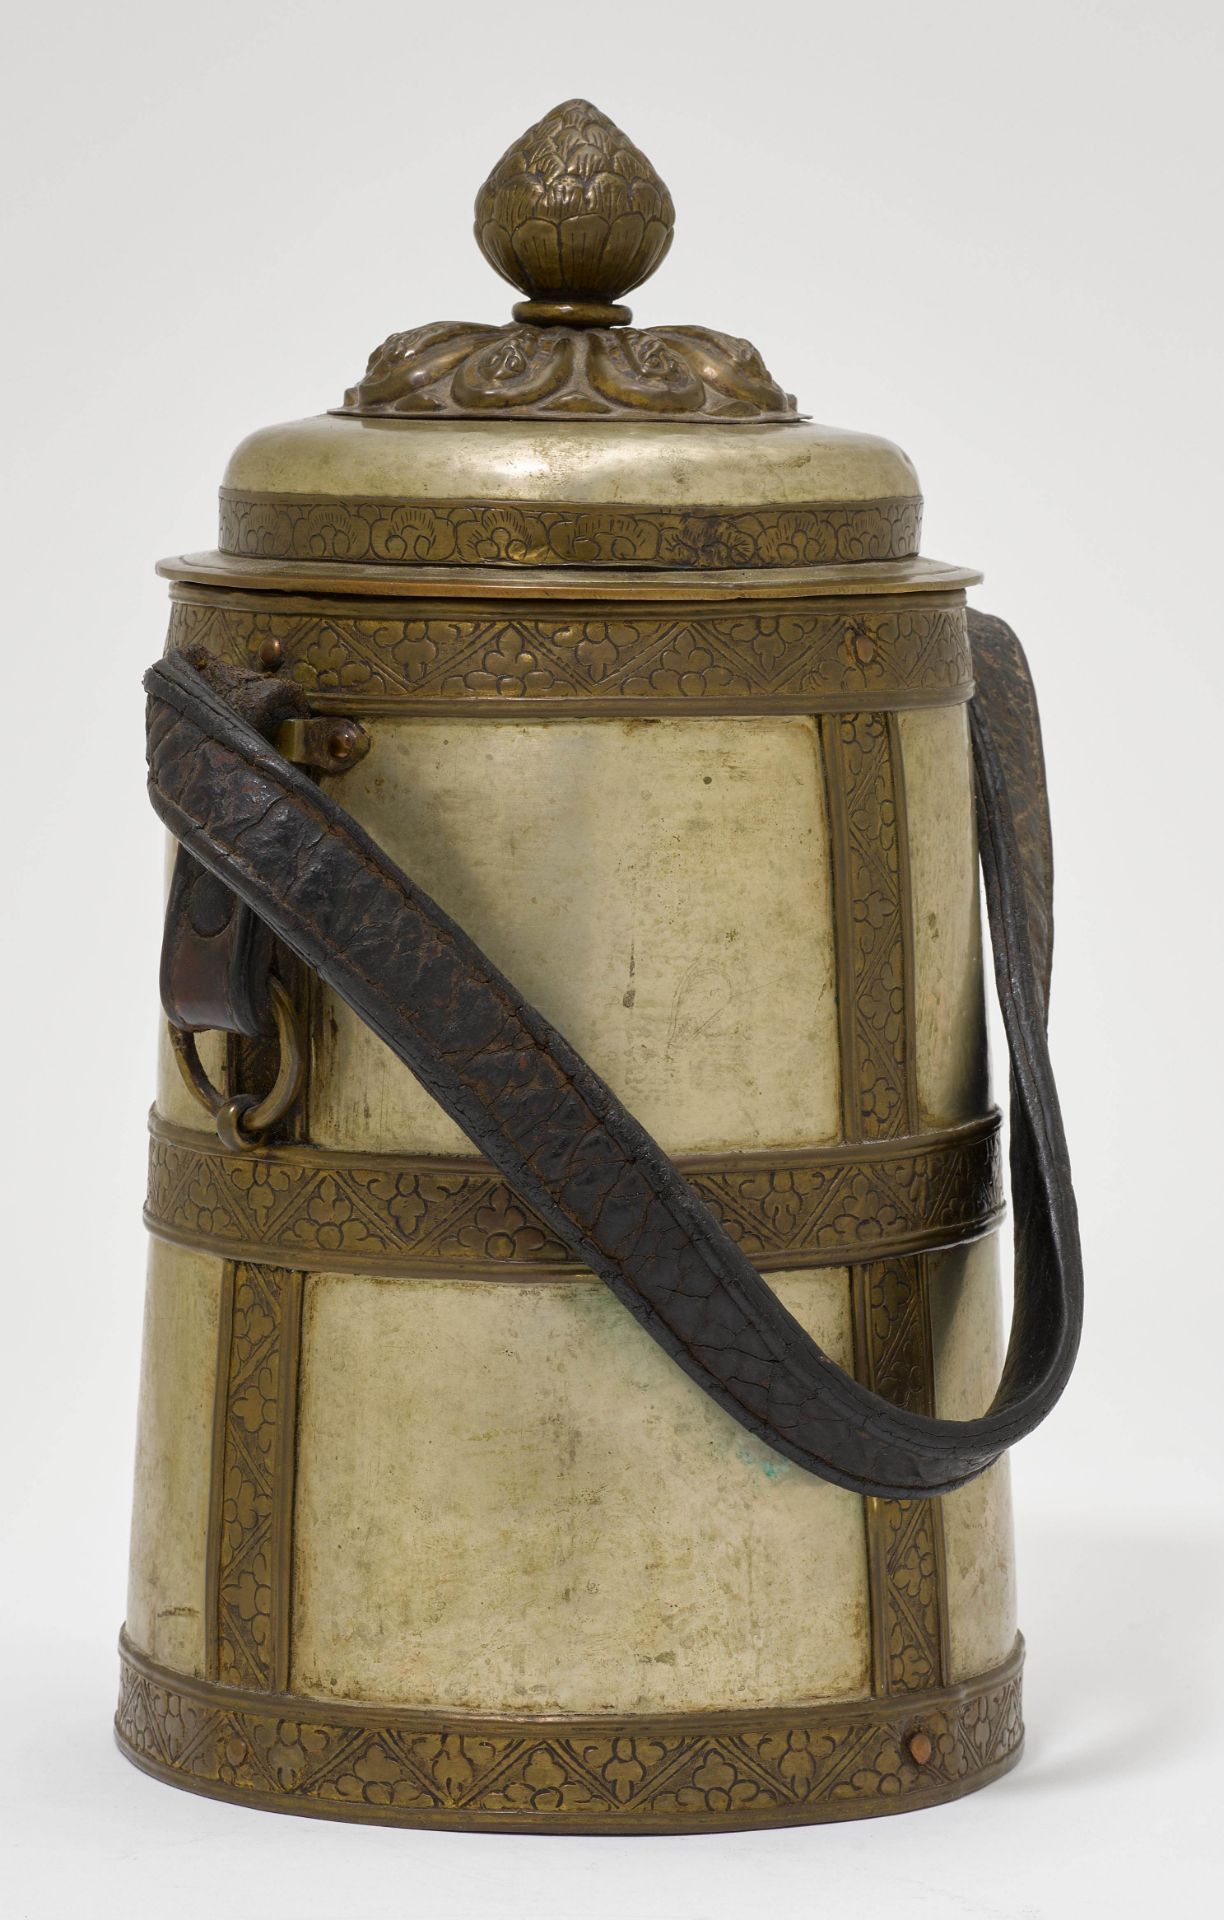 A FLASK FOR “CHANG”-BEER. - Image 2 of 3